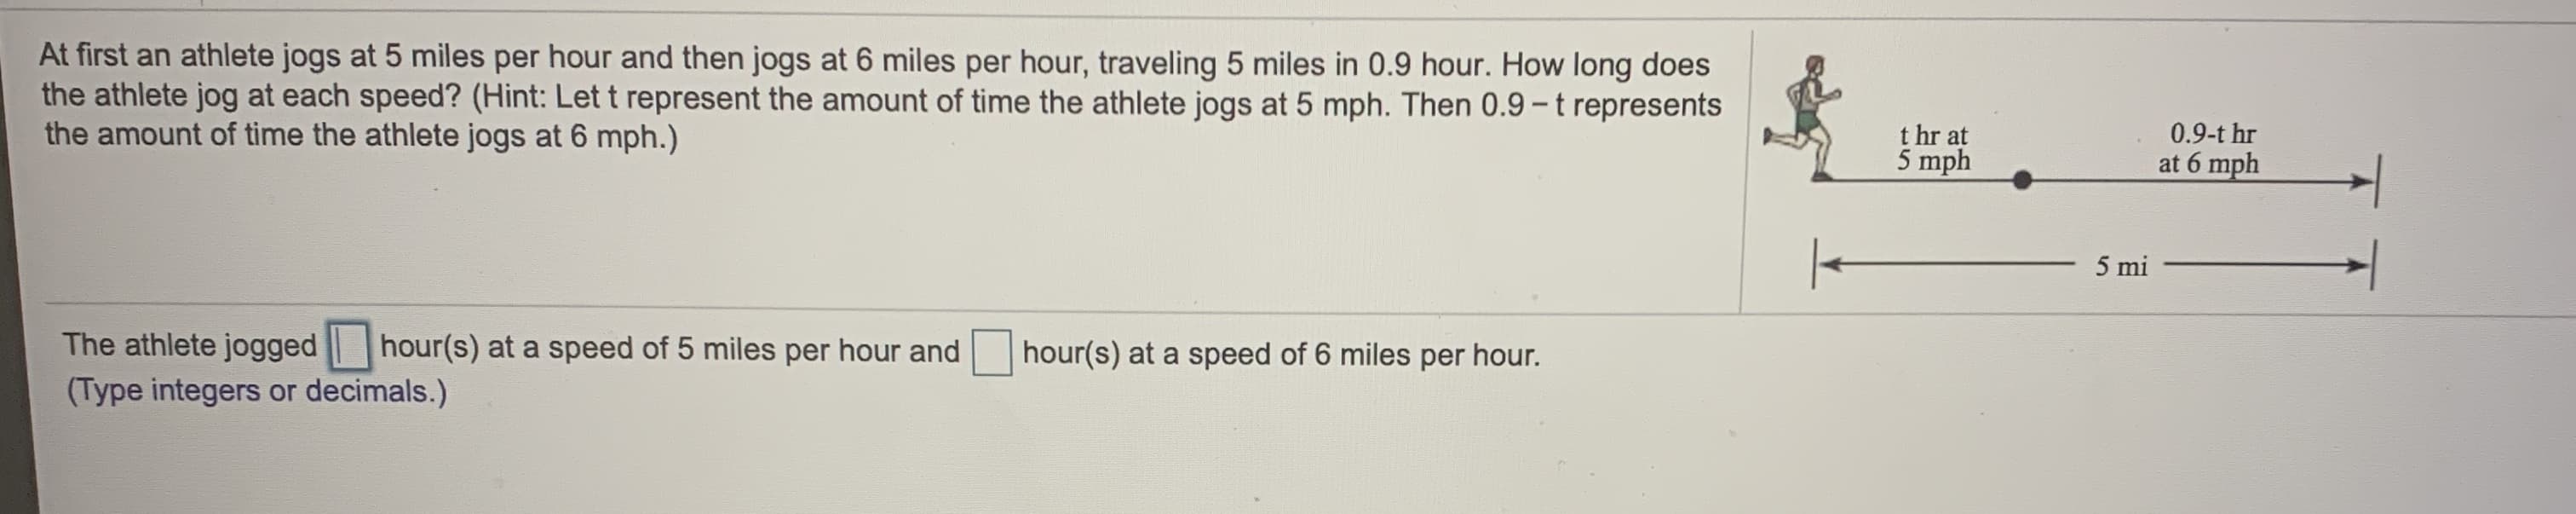 At first an athlete jogs at 5 miles per hour and then jogs at 6 miles per hour, traveling 5 miles in 0.9 hour. How long does
the athlete jog at each speed? (Hint: Let t represent the amount of time the athlete jogs at 5 mph. Then 0.9 – t represents
the amount of time the athlete jogs at 6 mph.)
-
0.9-t hr
t hr at
5 mph
at 6 mph
5 mi
